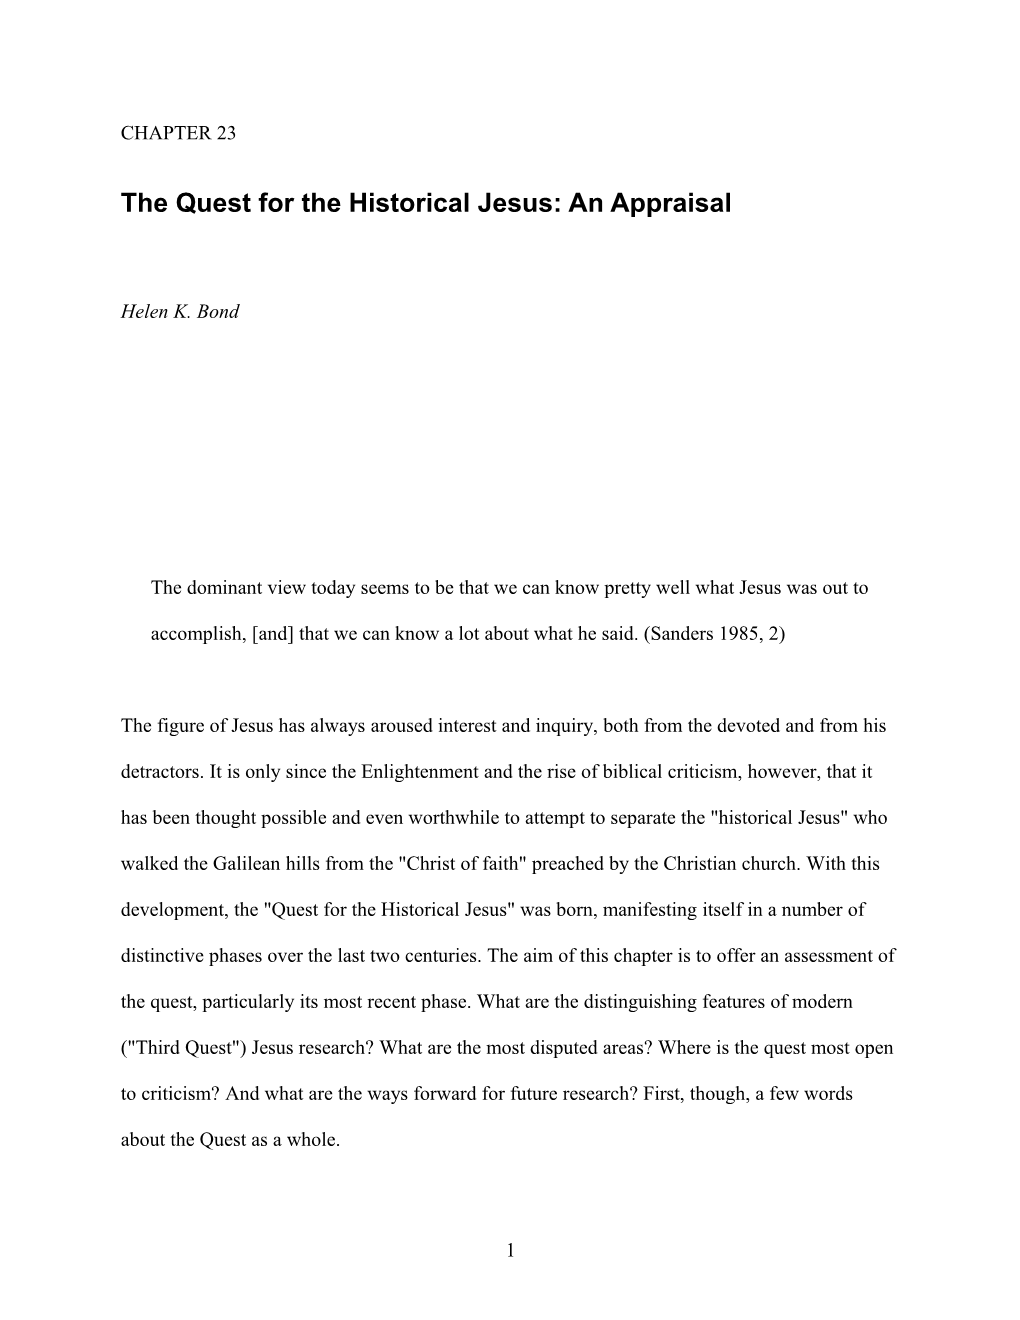 The Quest for the Historical Jesus: an Appraisal